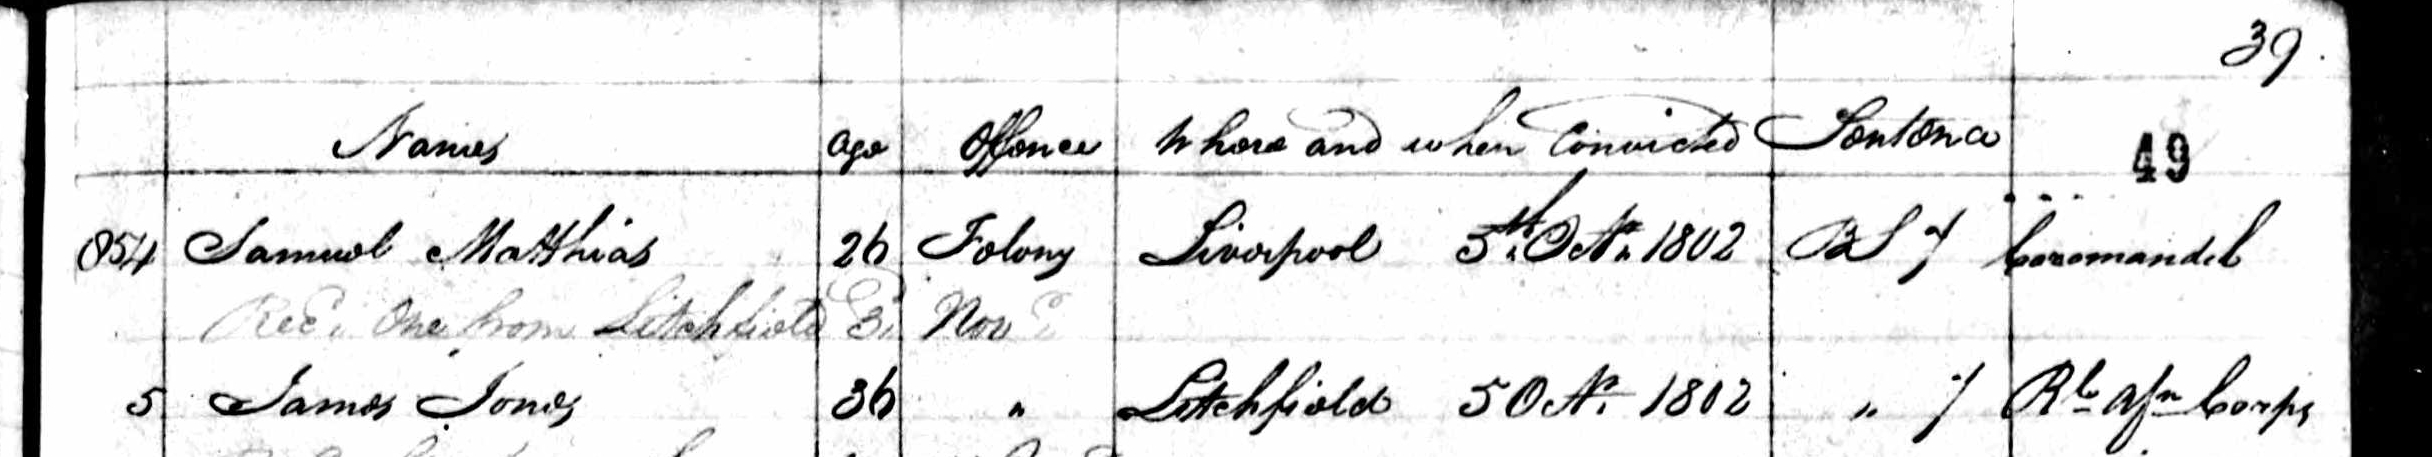 James's farther's prison record